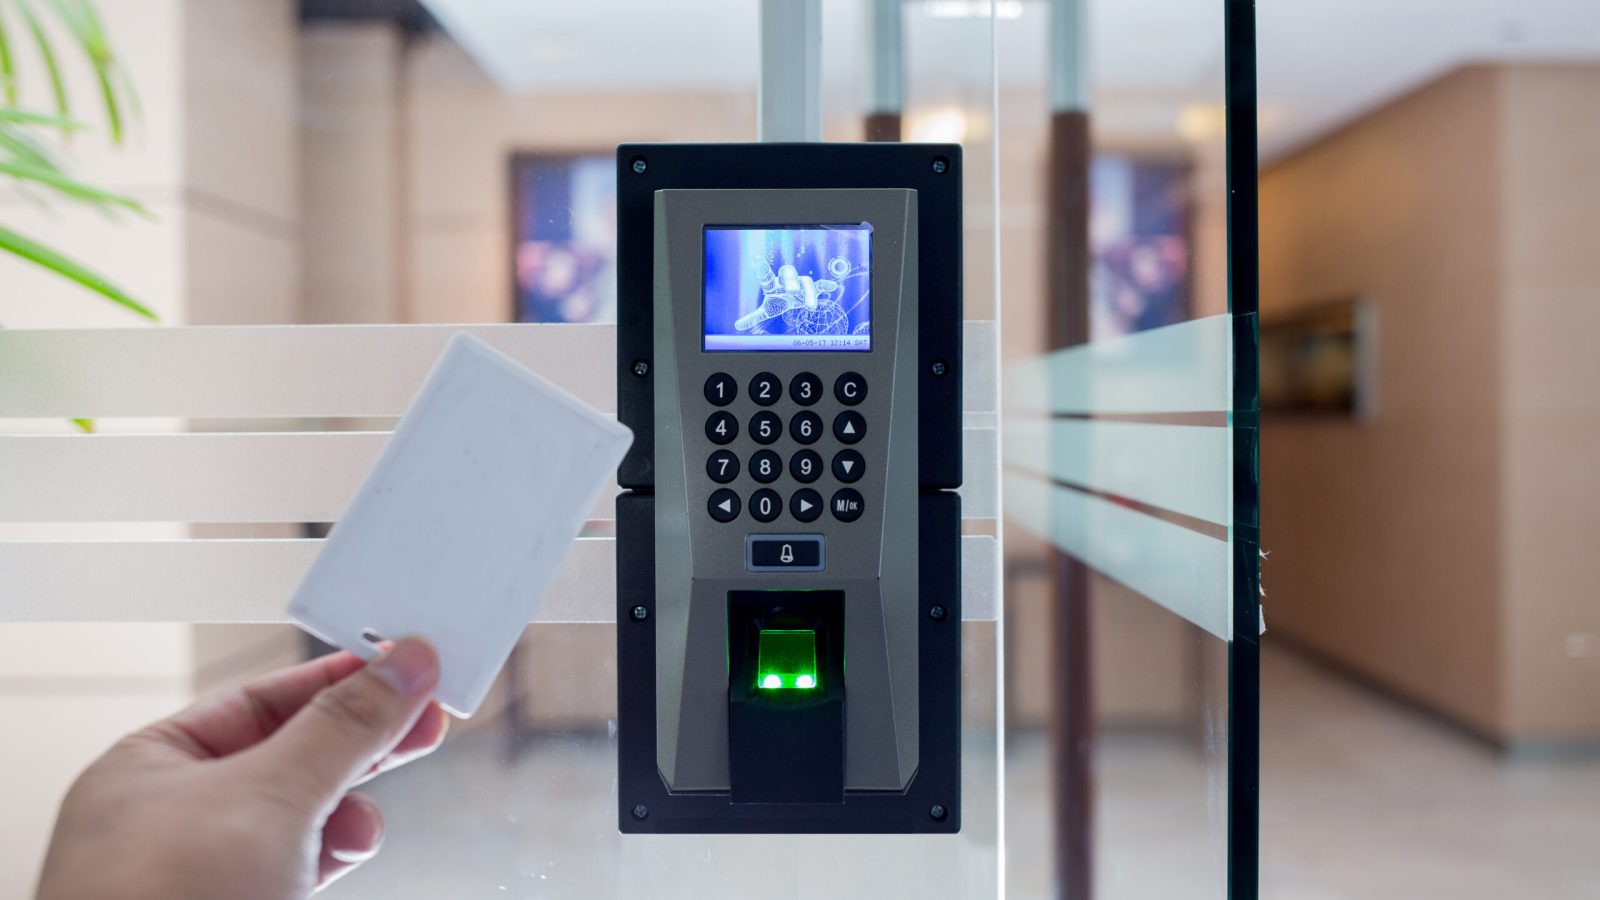 Take control with our advanced access control pads and cards, ensuring secure entry points for your business in Des Moines, Ankeny, and across Iowa.